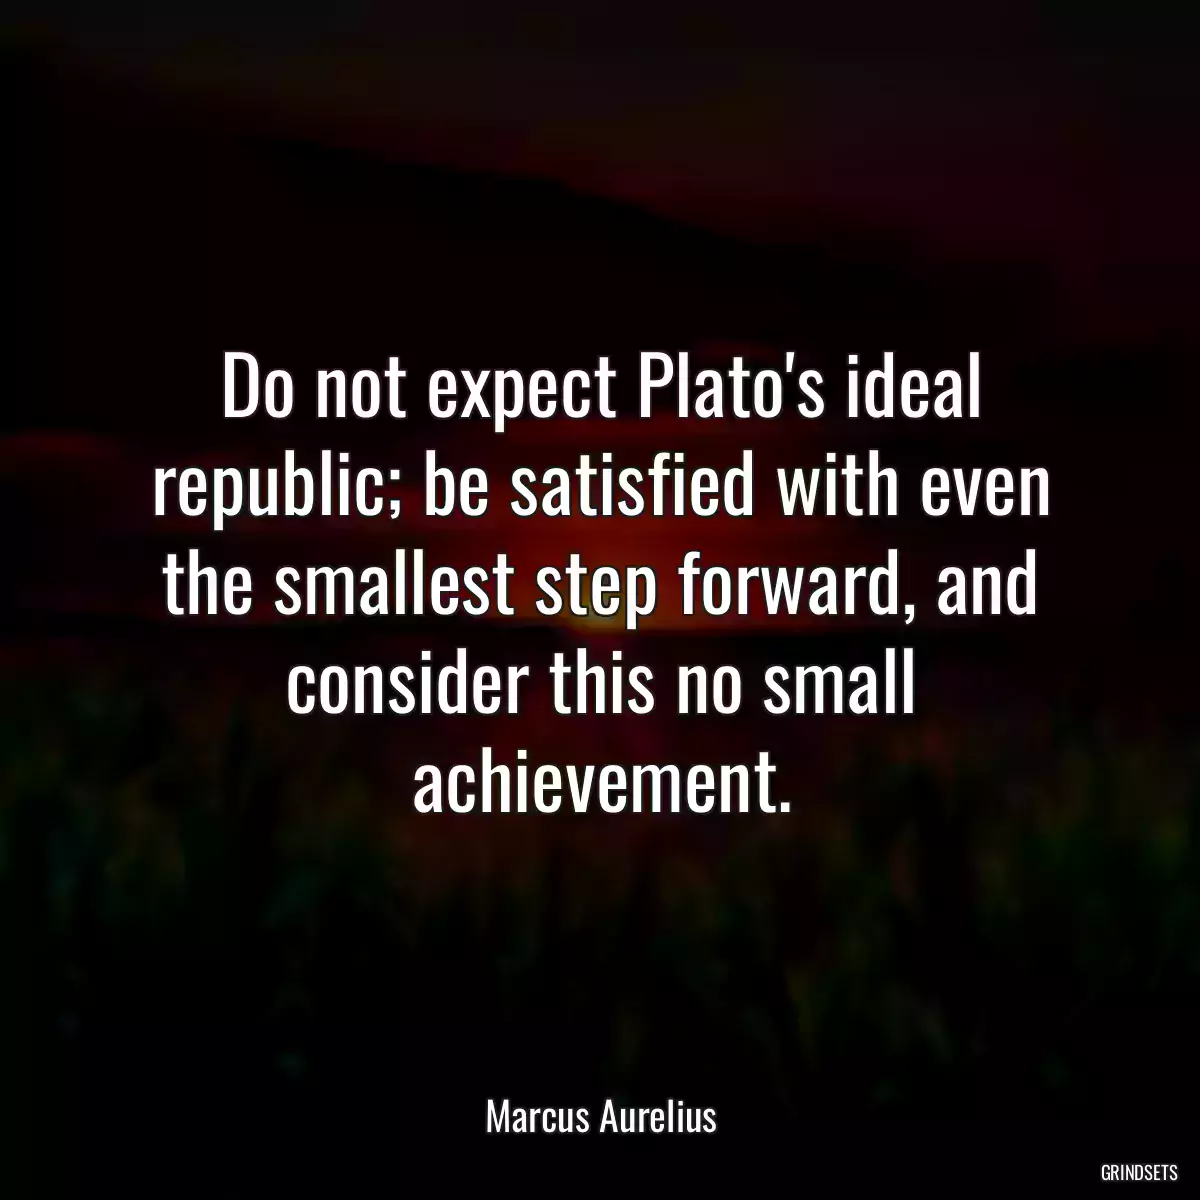 Do not expect Plato\'s ideal republic; be satisfied with even the smallest step forward, and consider this no small achievement.